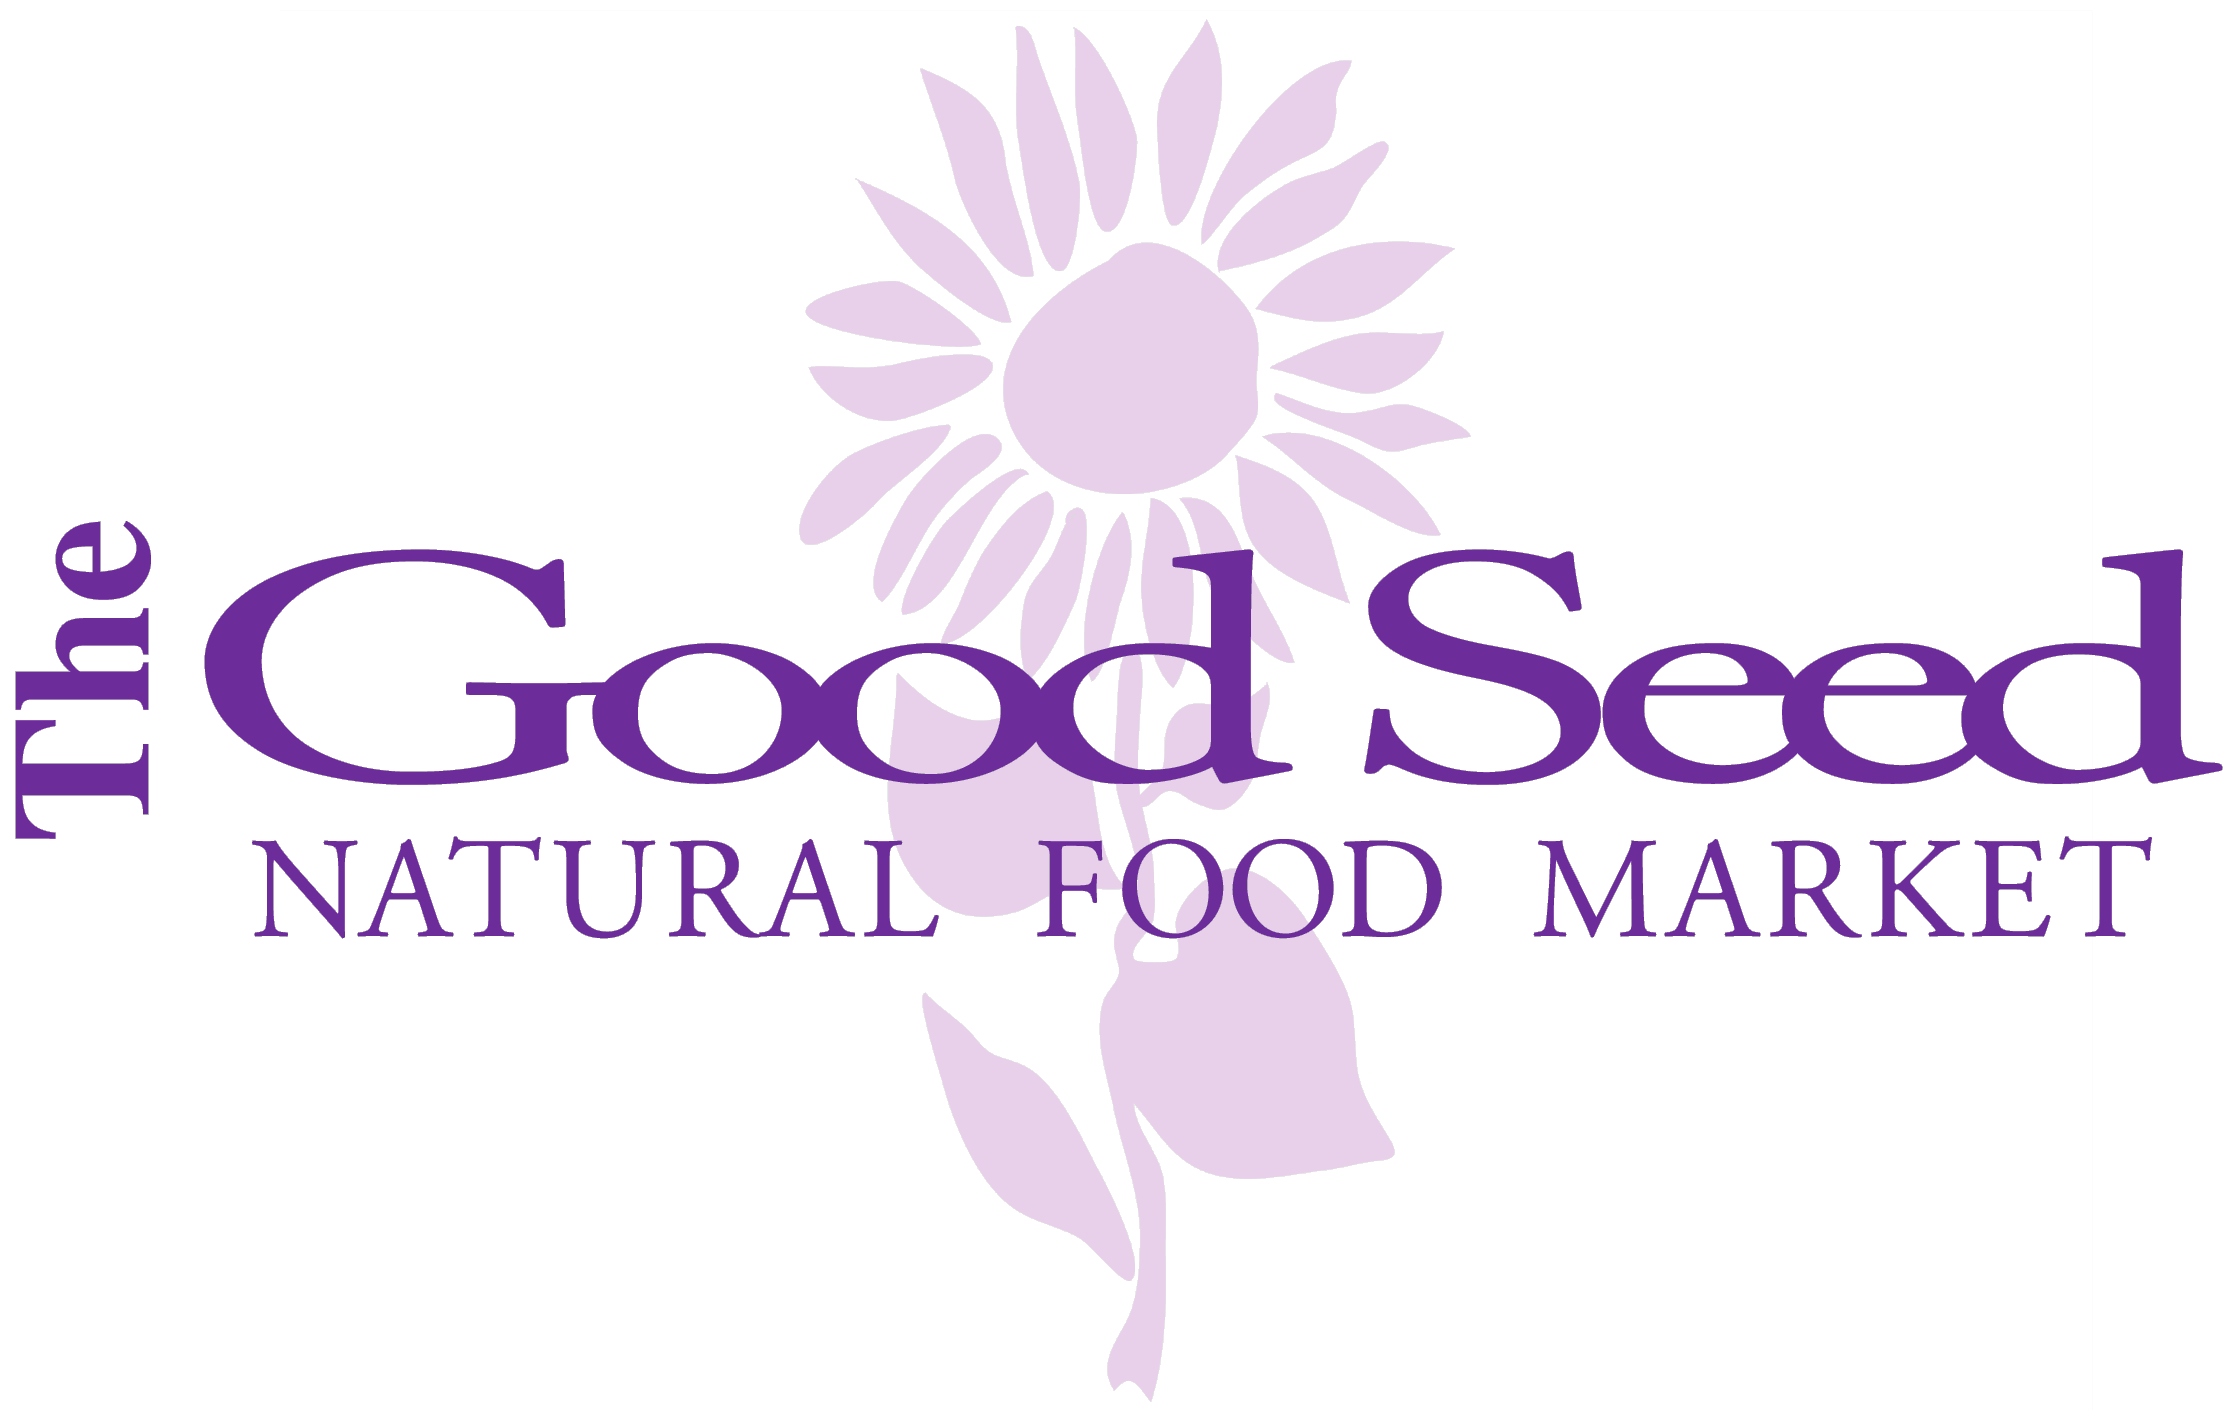 The Good Seed Market